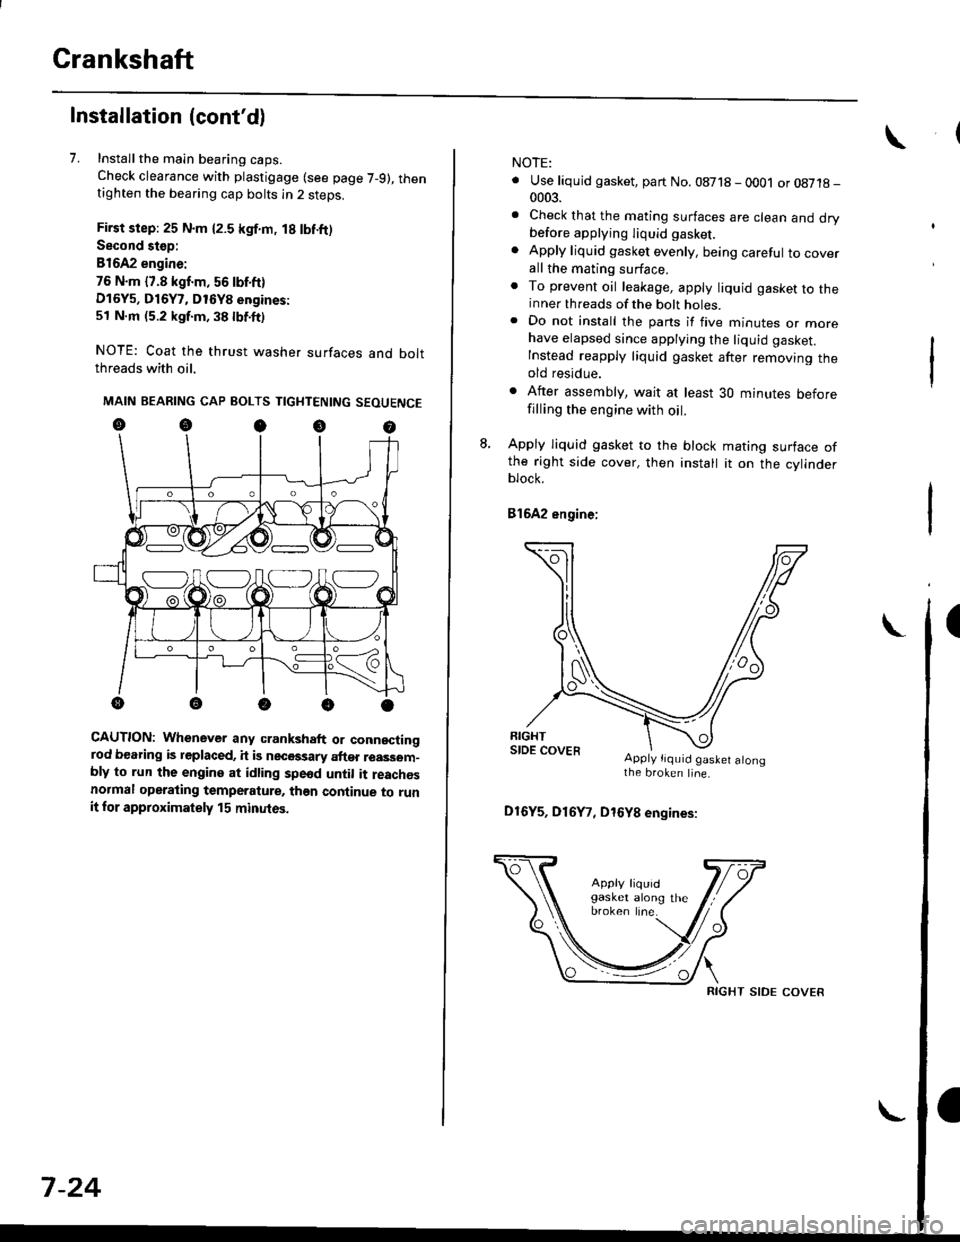 HONDA CIVIC 1996 6.G Service Manual Crankshaft
Installation (contd)
7. Installthe main bearing caps.
Check clearance with plastigage (see page 7-9), thentighten the bearing cap bolts in 2 steps.
First step: 25 N.m {2.5 kgf.m, 18 lbf.ft